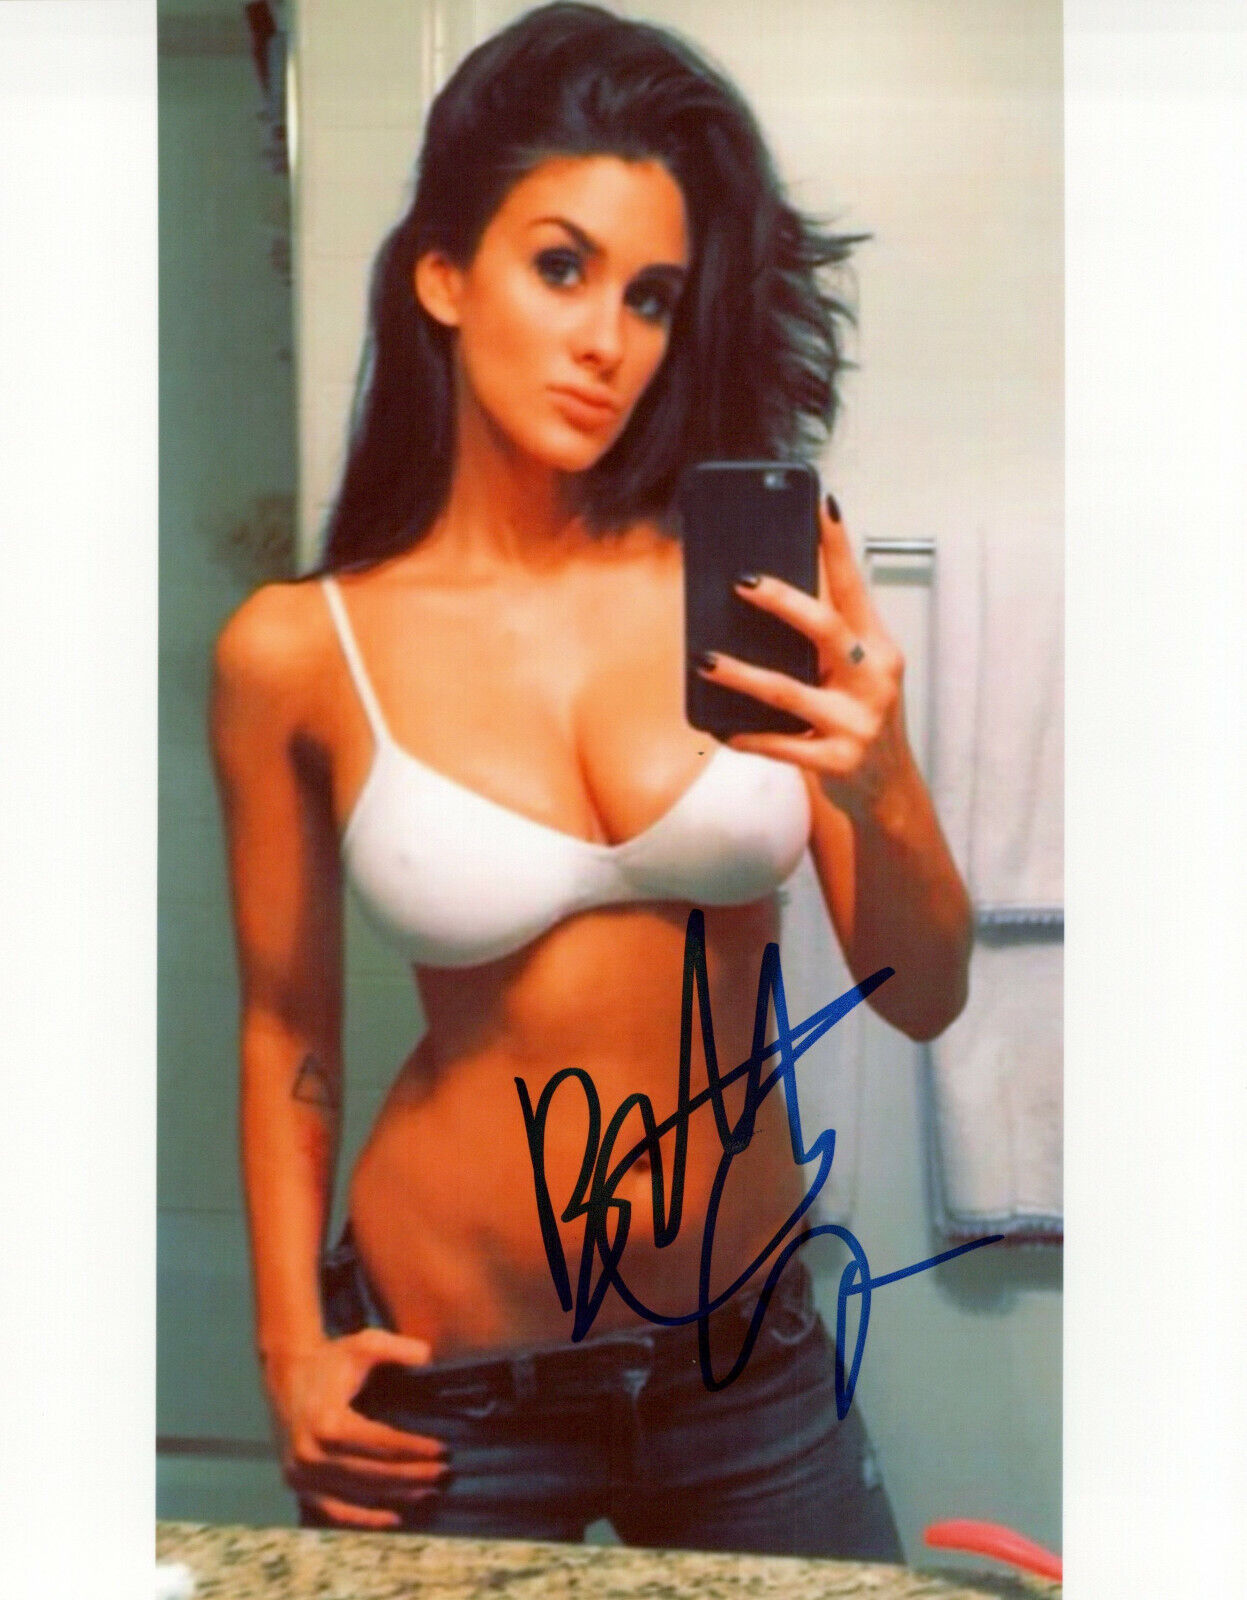 caren hunt recommends brittany furlan nude photos pic